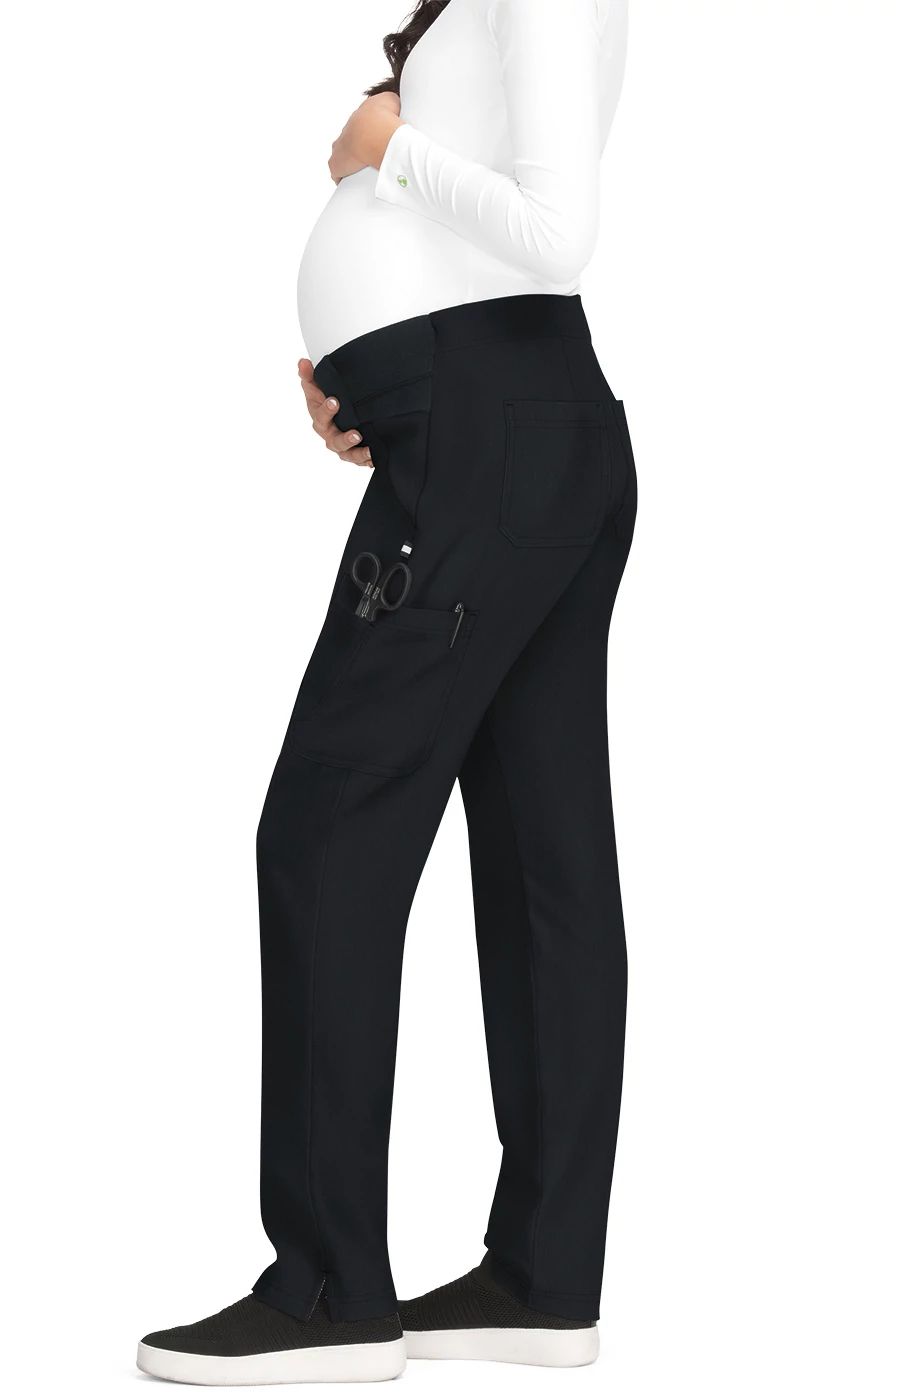 on-the-move-maternity-pant-black